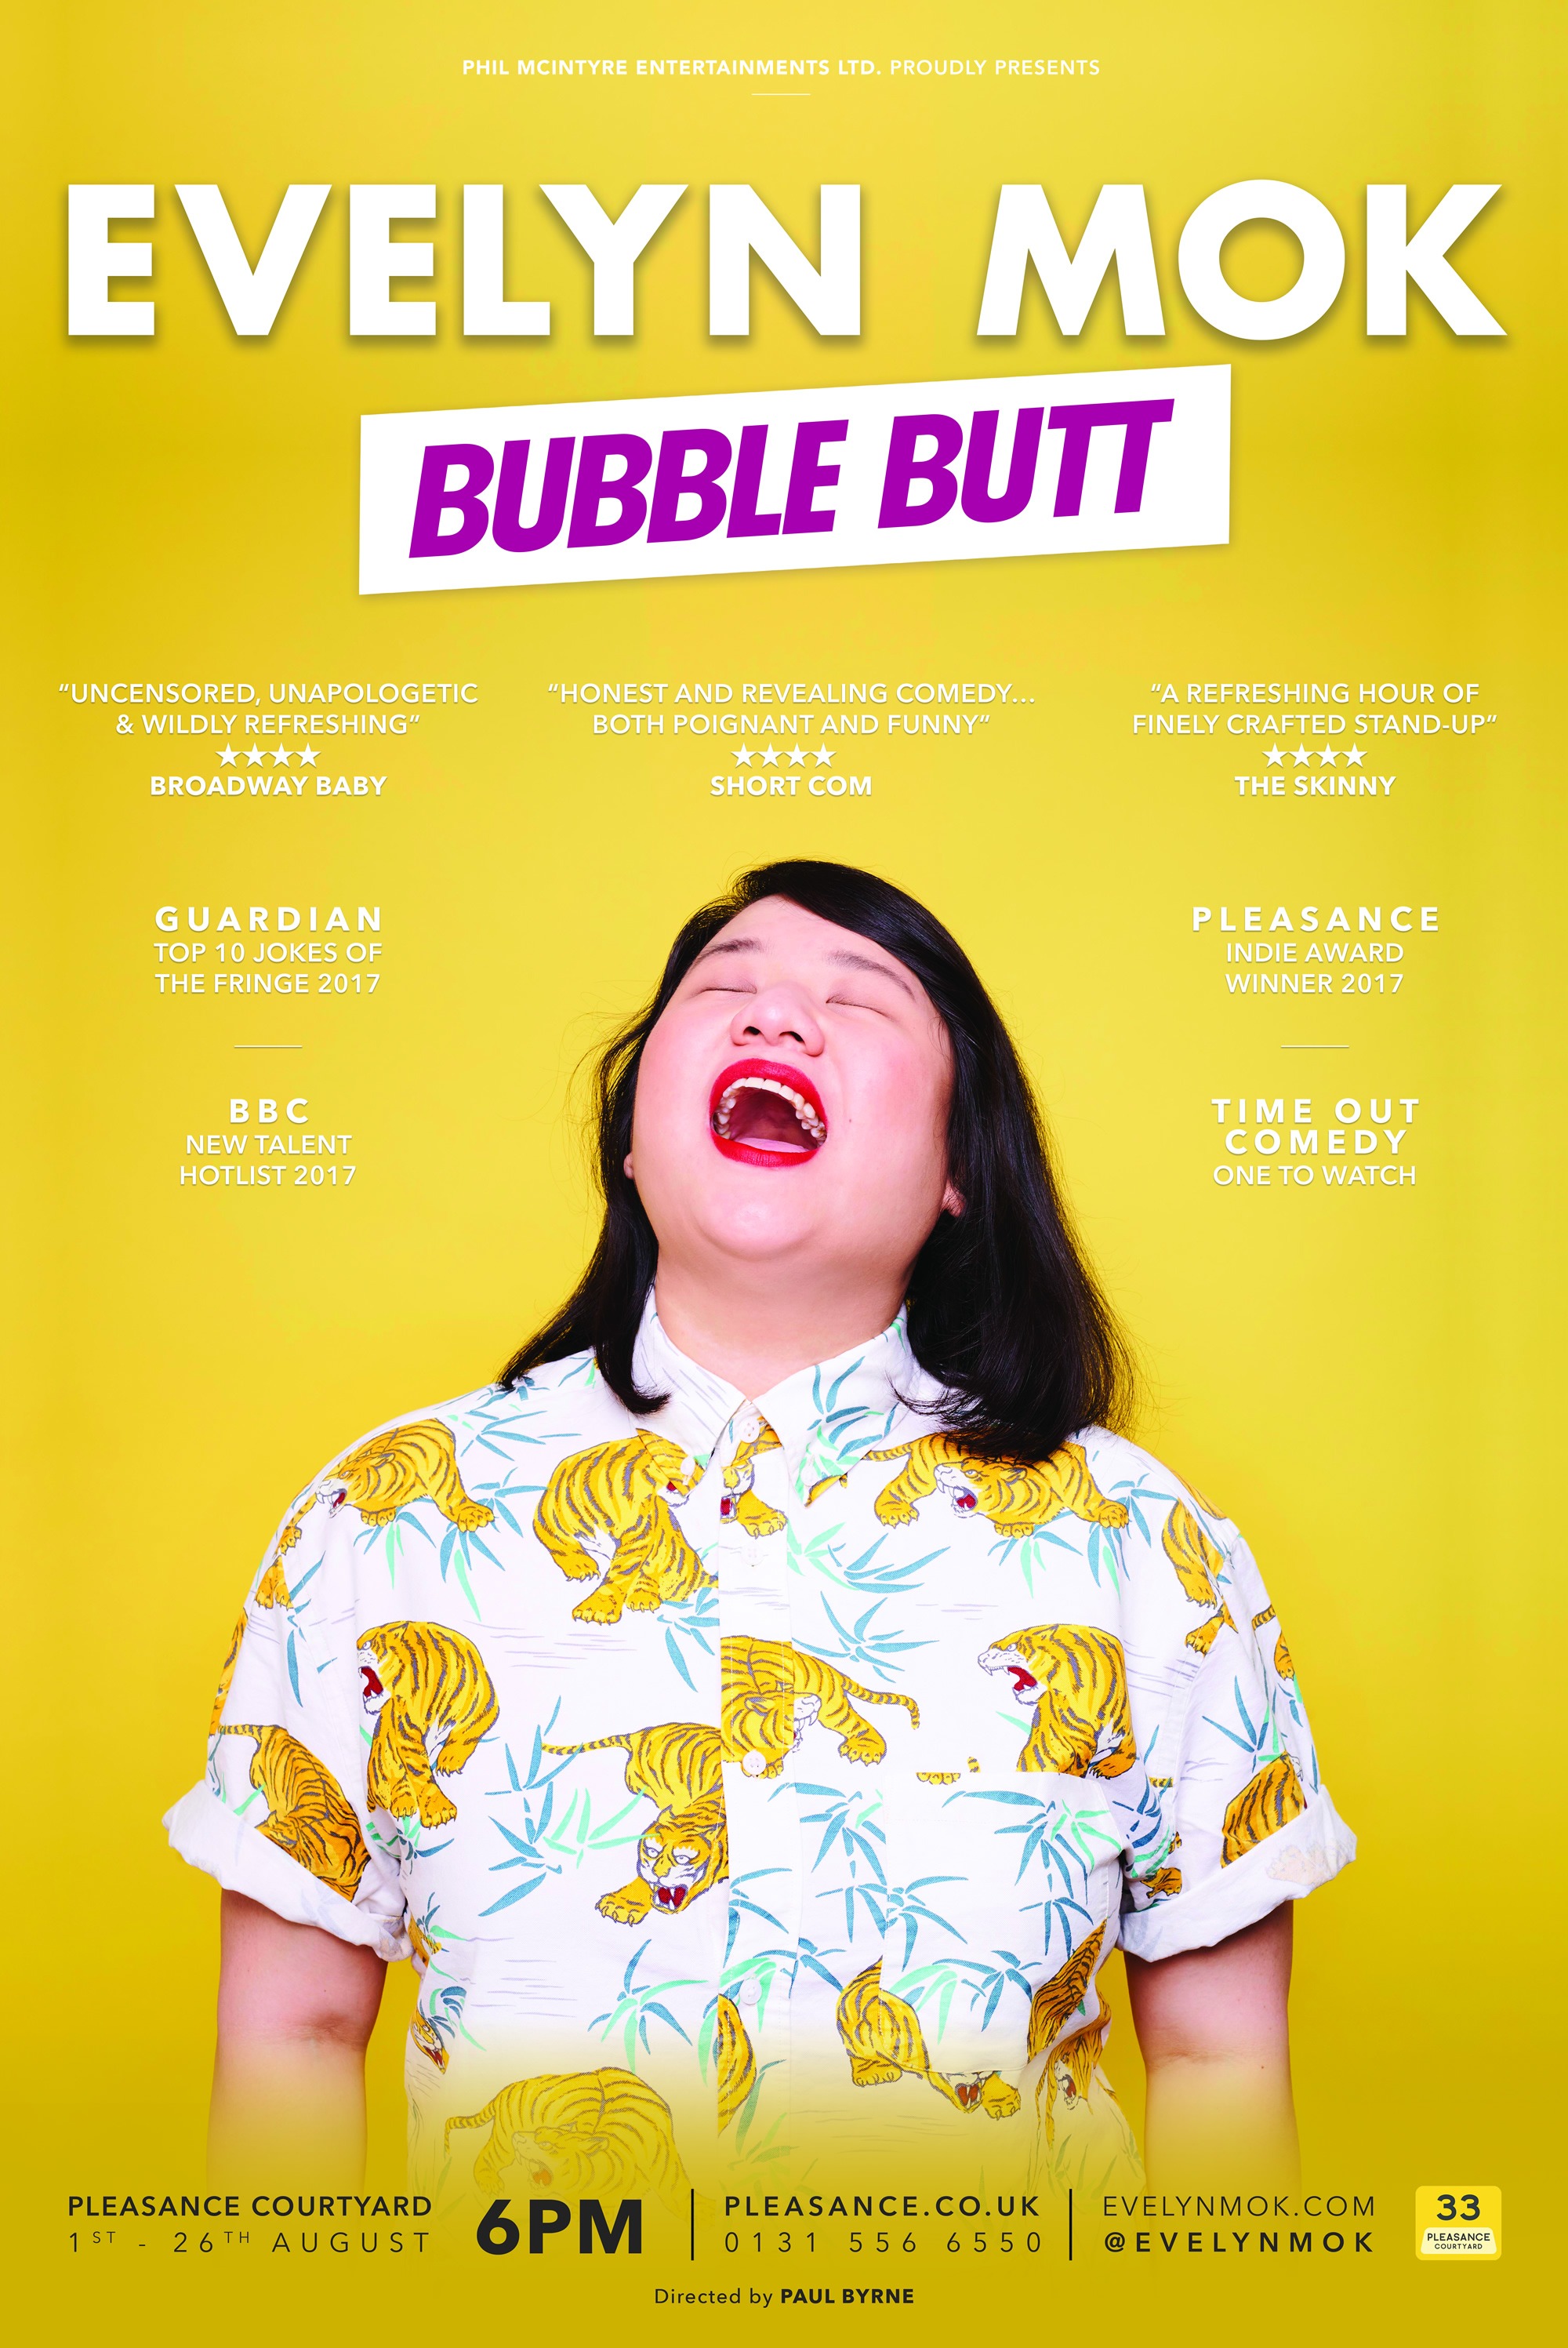 The poster for Evelyn Mok: Bubble Butt